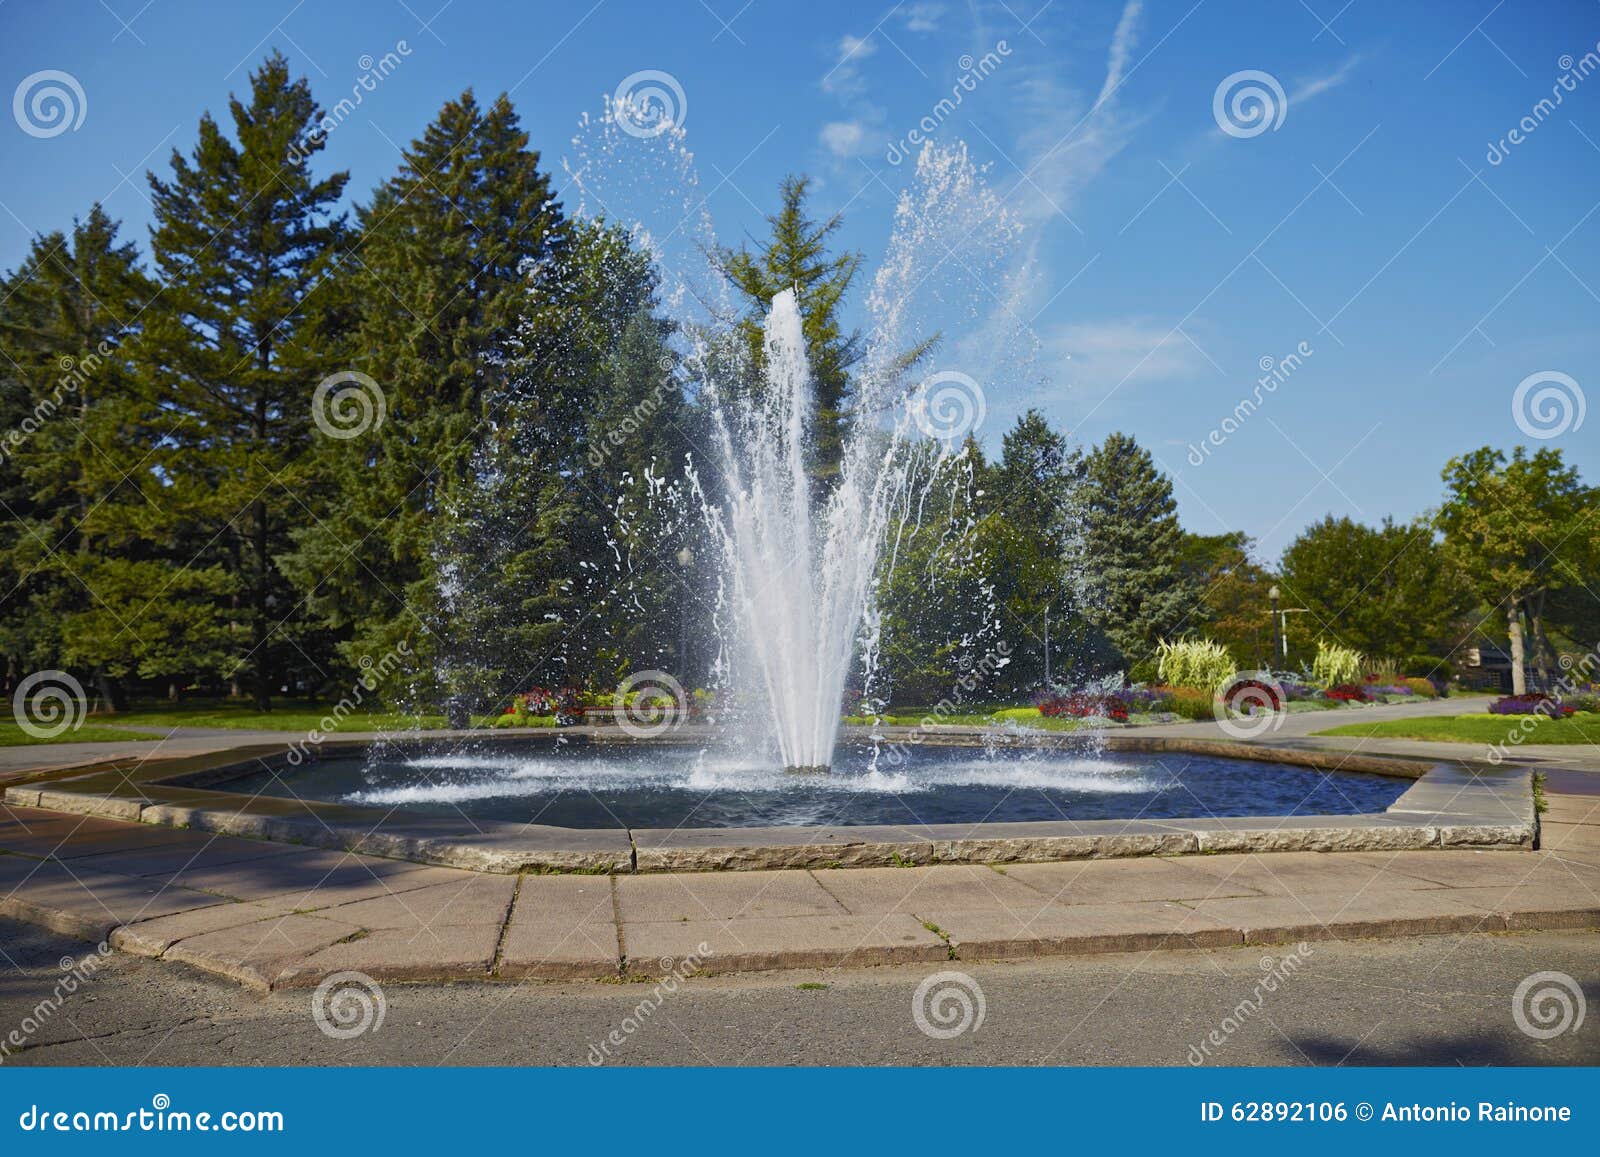 fountain spurt of water